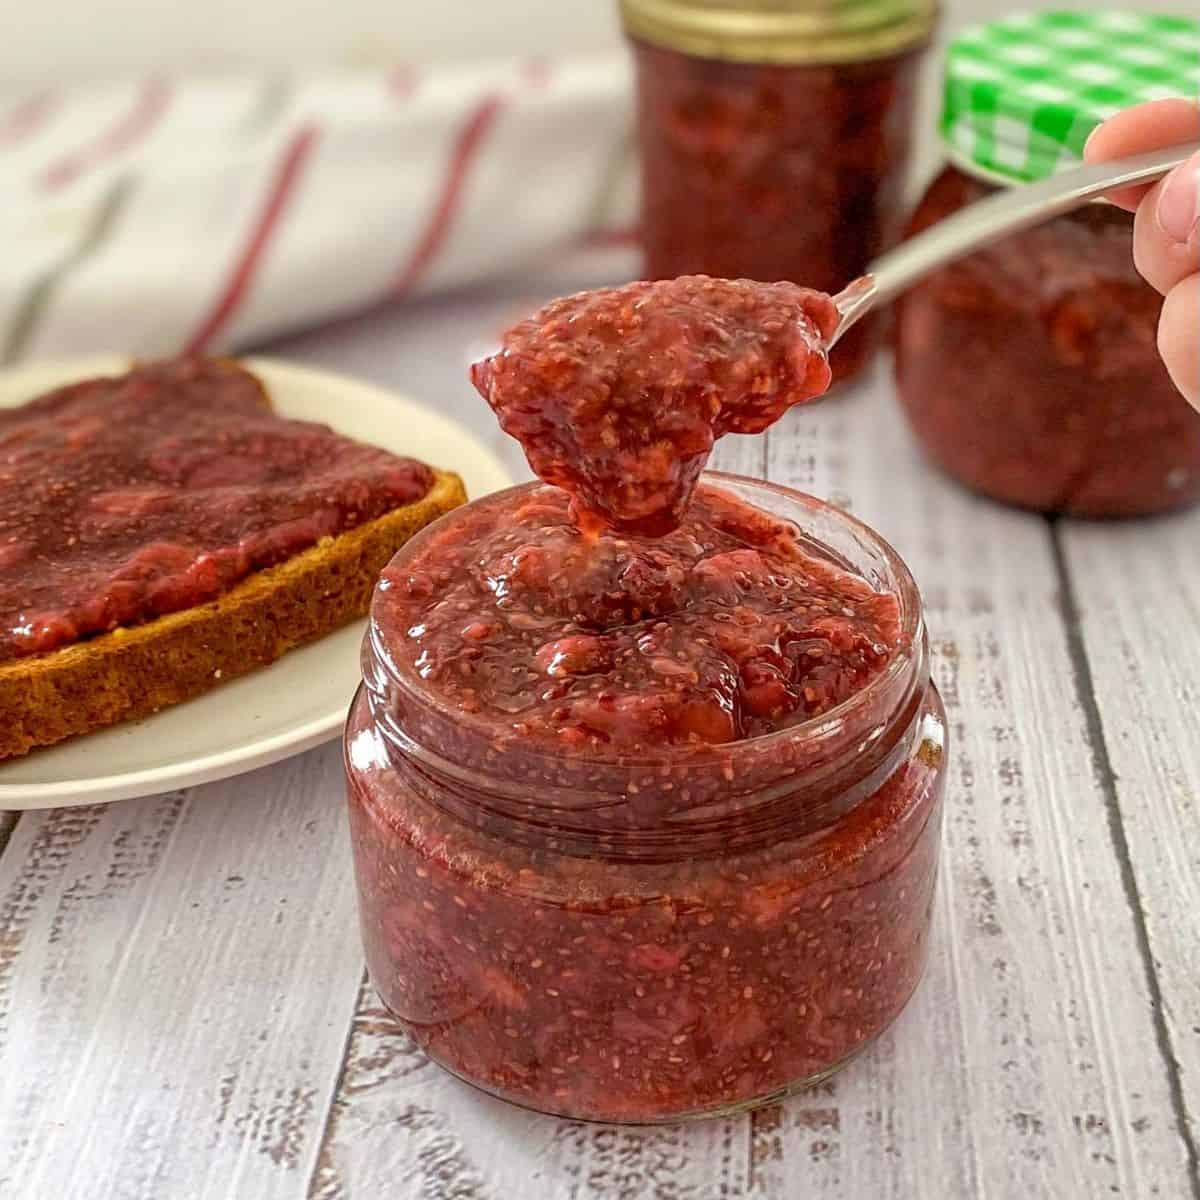 Spoon lifting strawberry jam from glass jar, with more jars of jam in background.